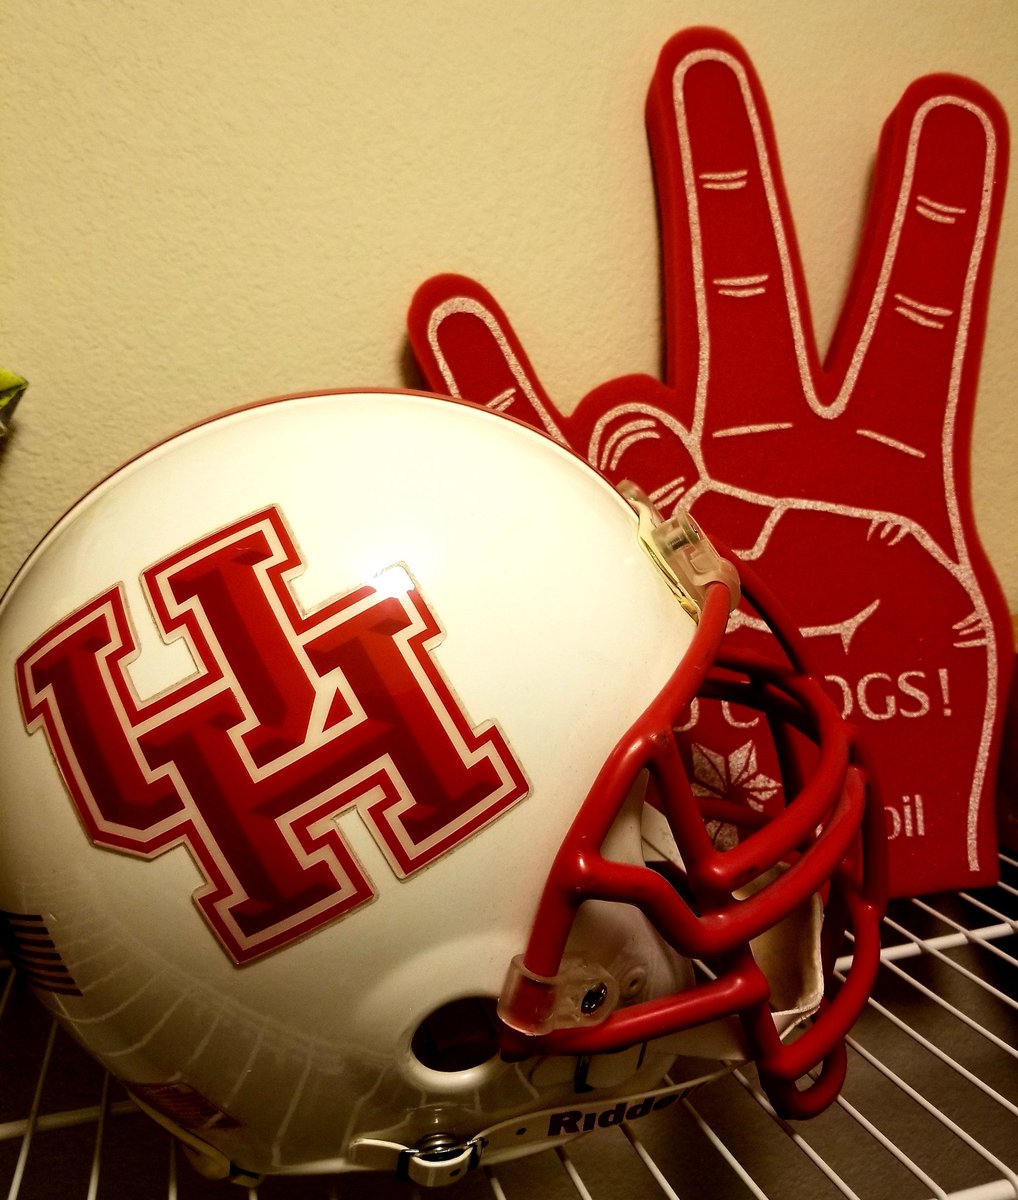 UH is ready to turn the world upside down! Ed & Co. have some scores to settle. Coach Briles gonna light up that scoreboard!#GOCOOGS#youbetterasksomebody